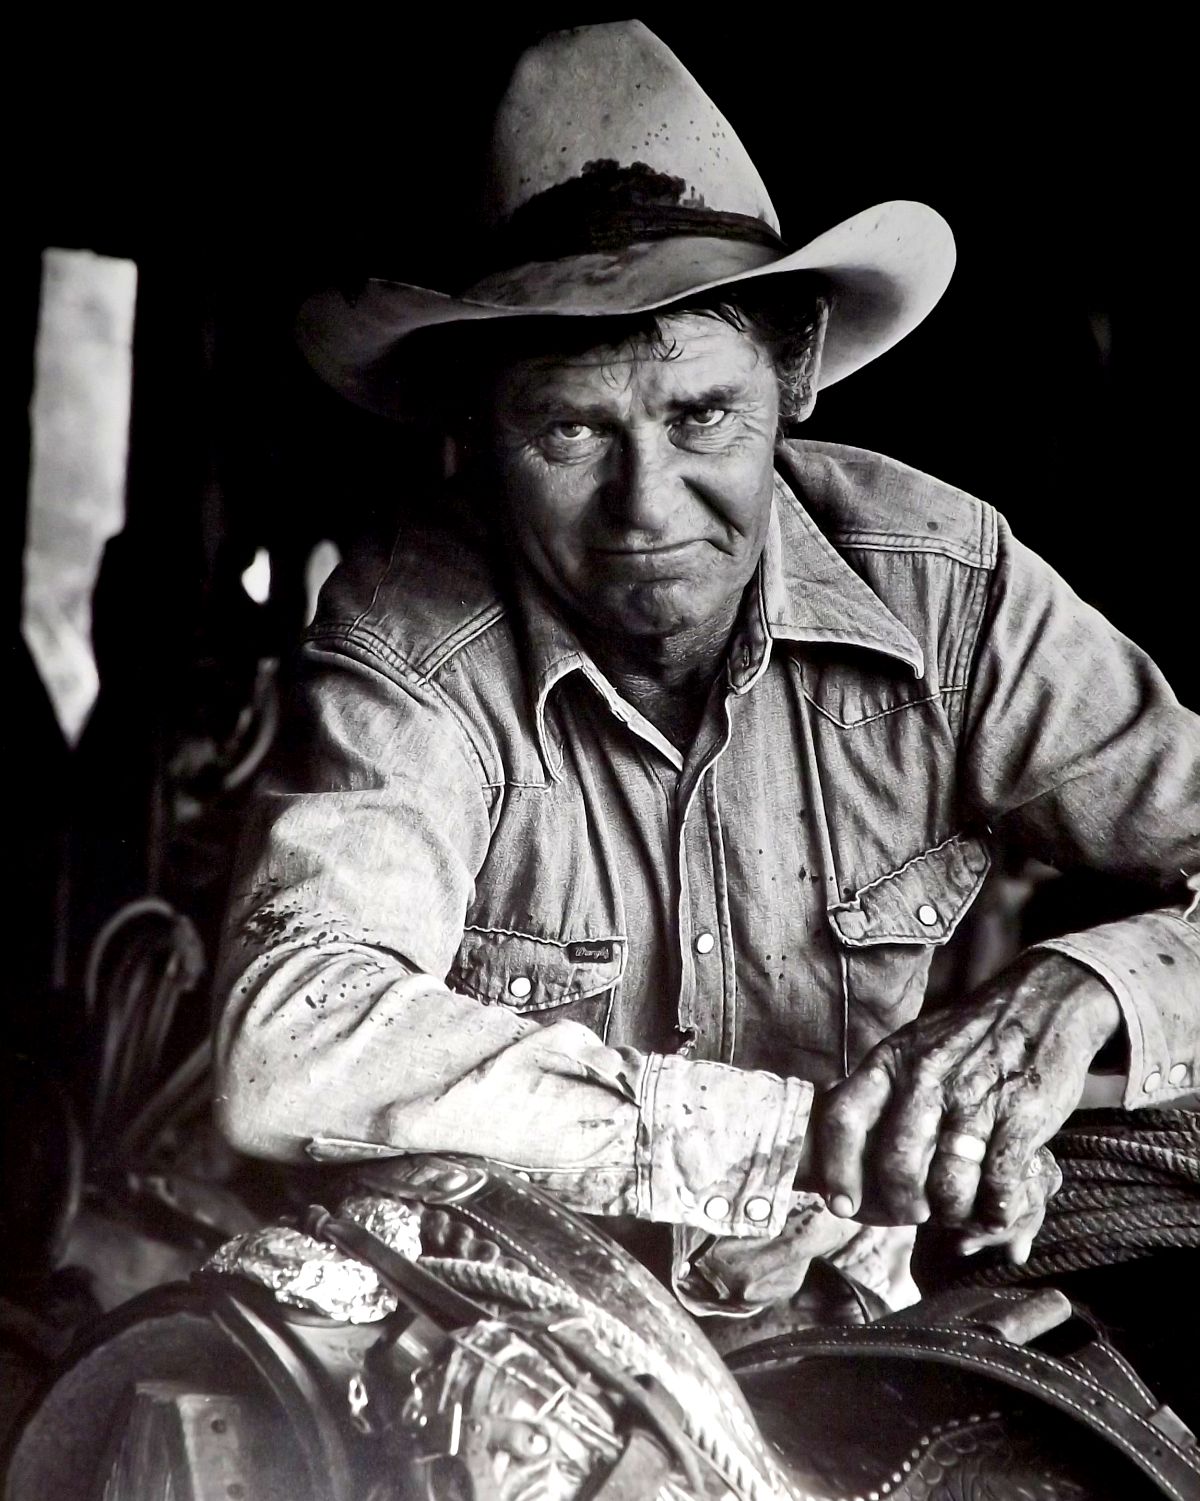 Cowboys Don't Do Lunch: The Photographs of Herb Cohen